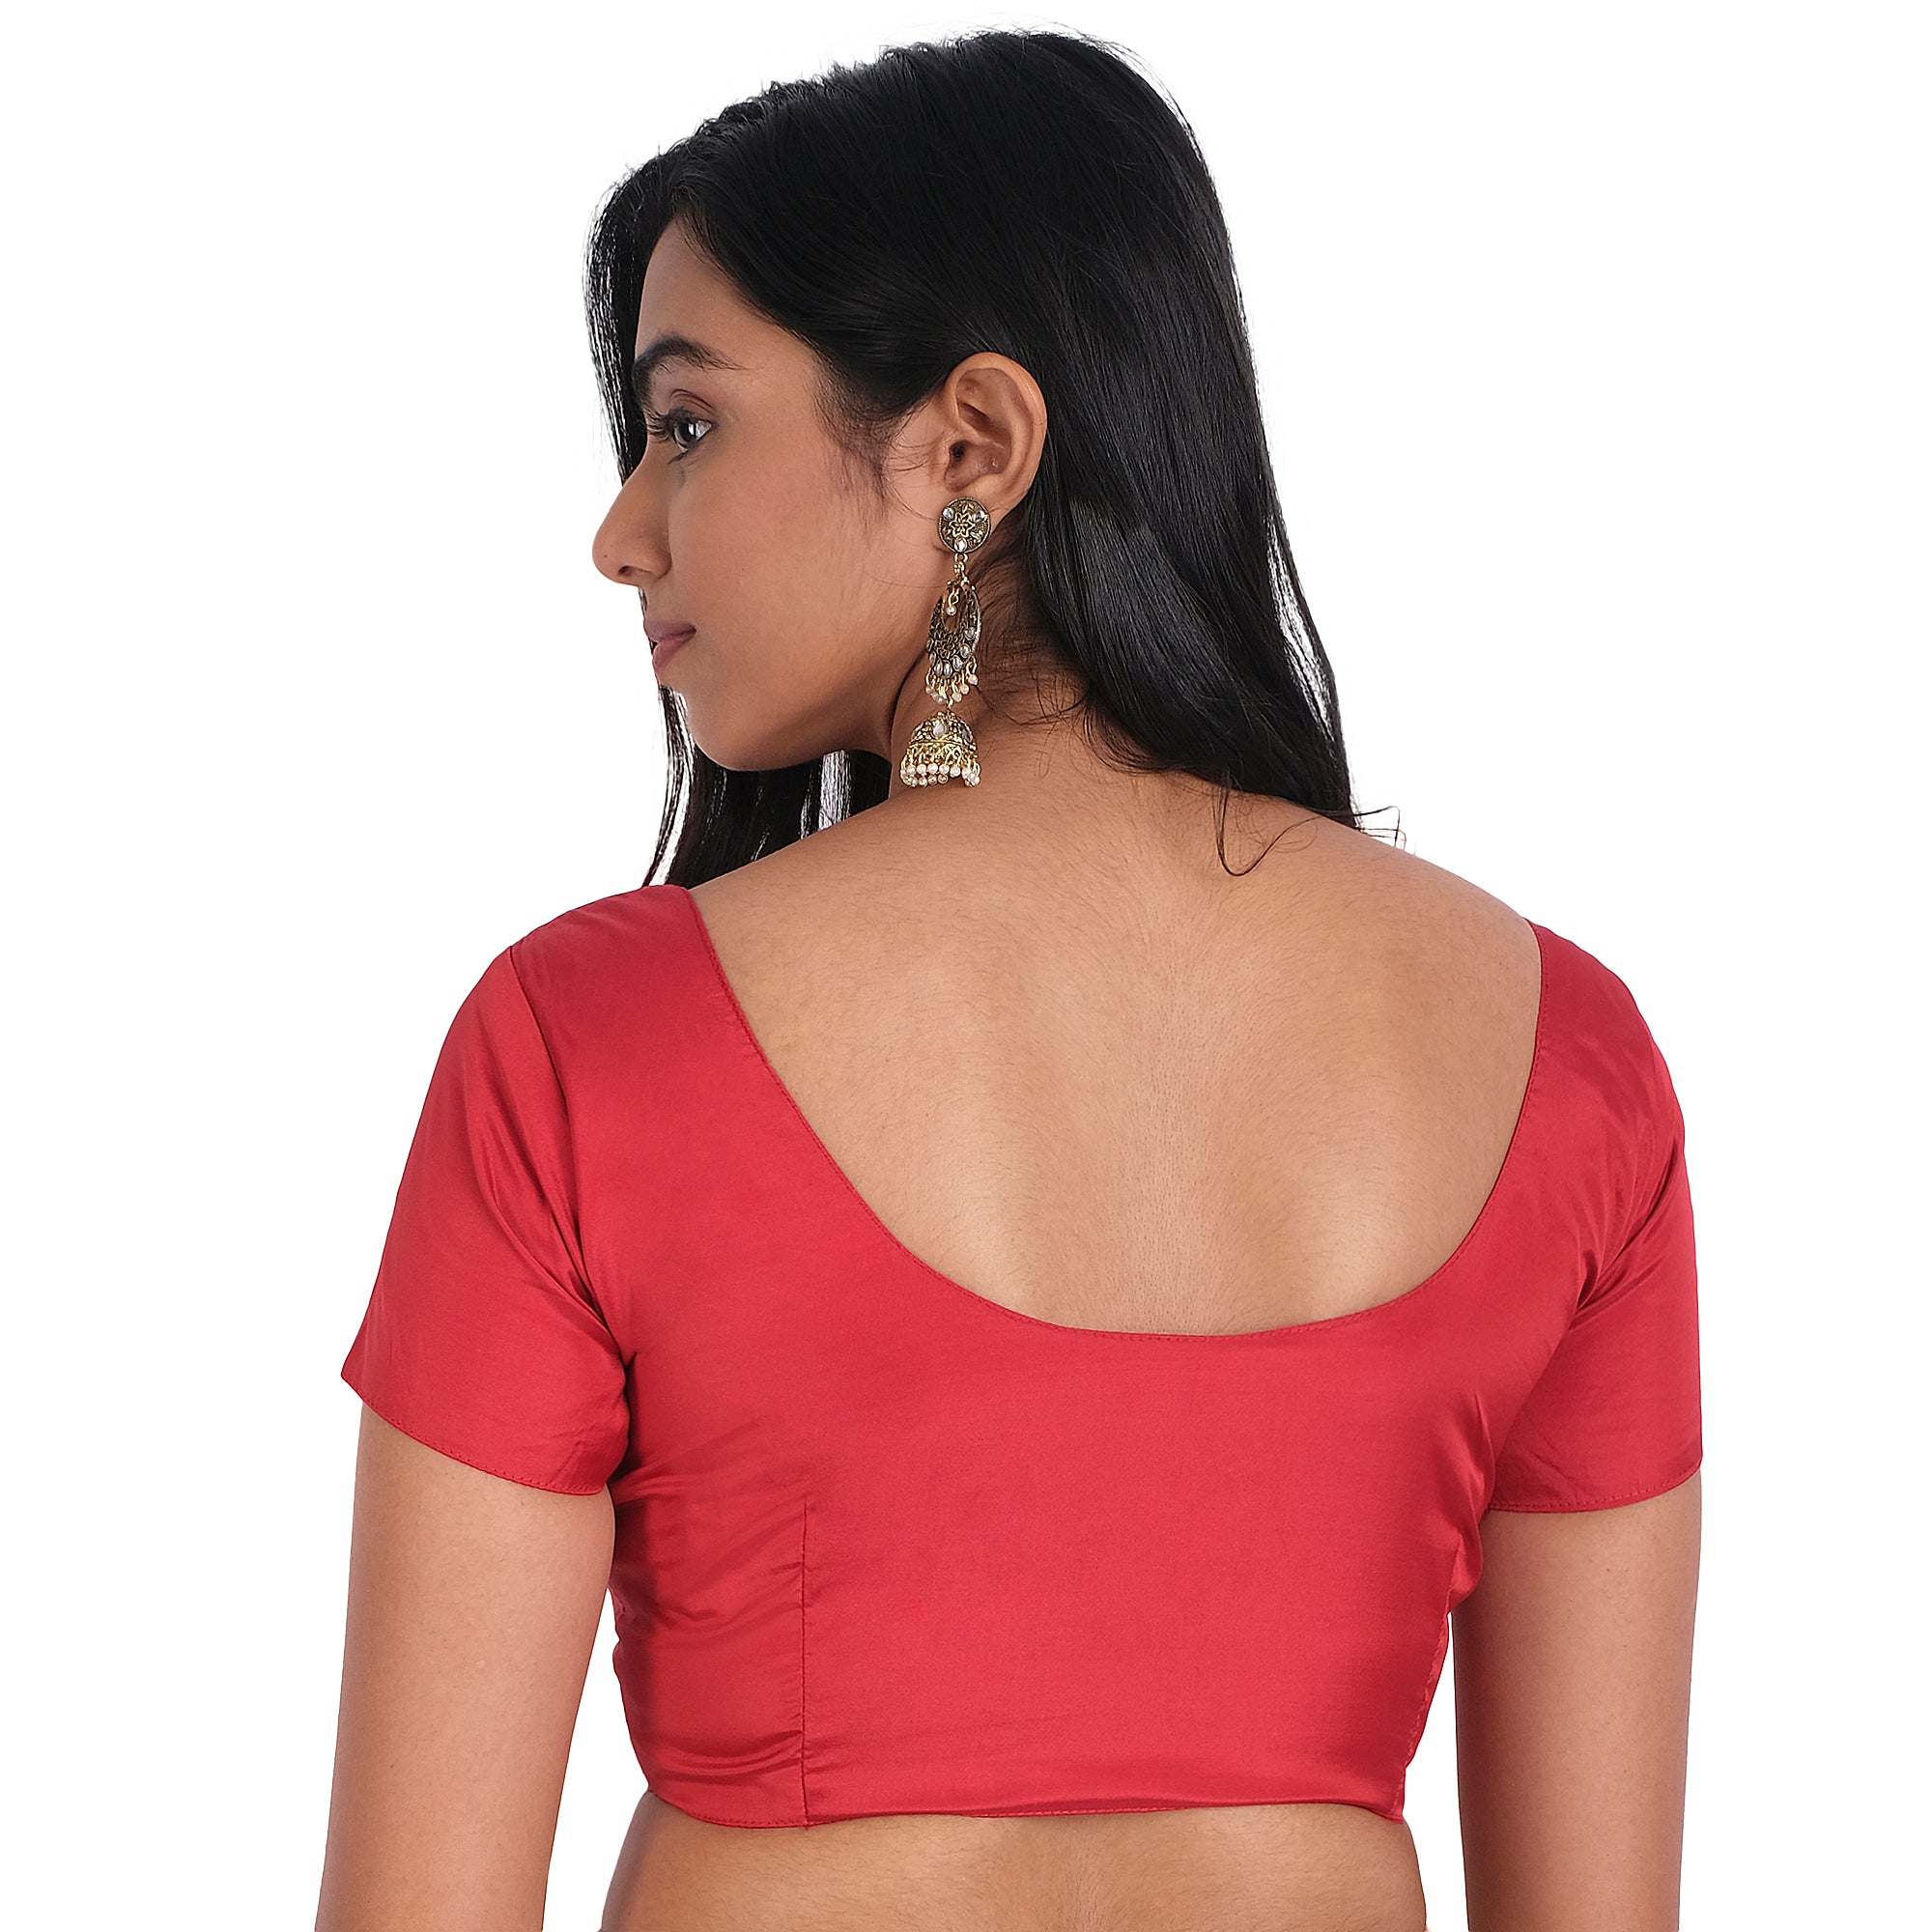 Silk Cotton Blouse,Red